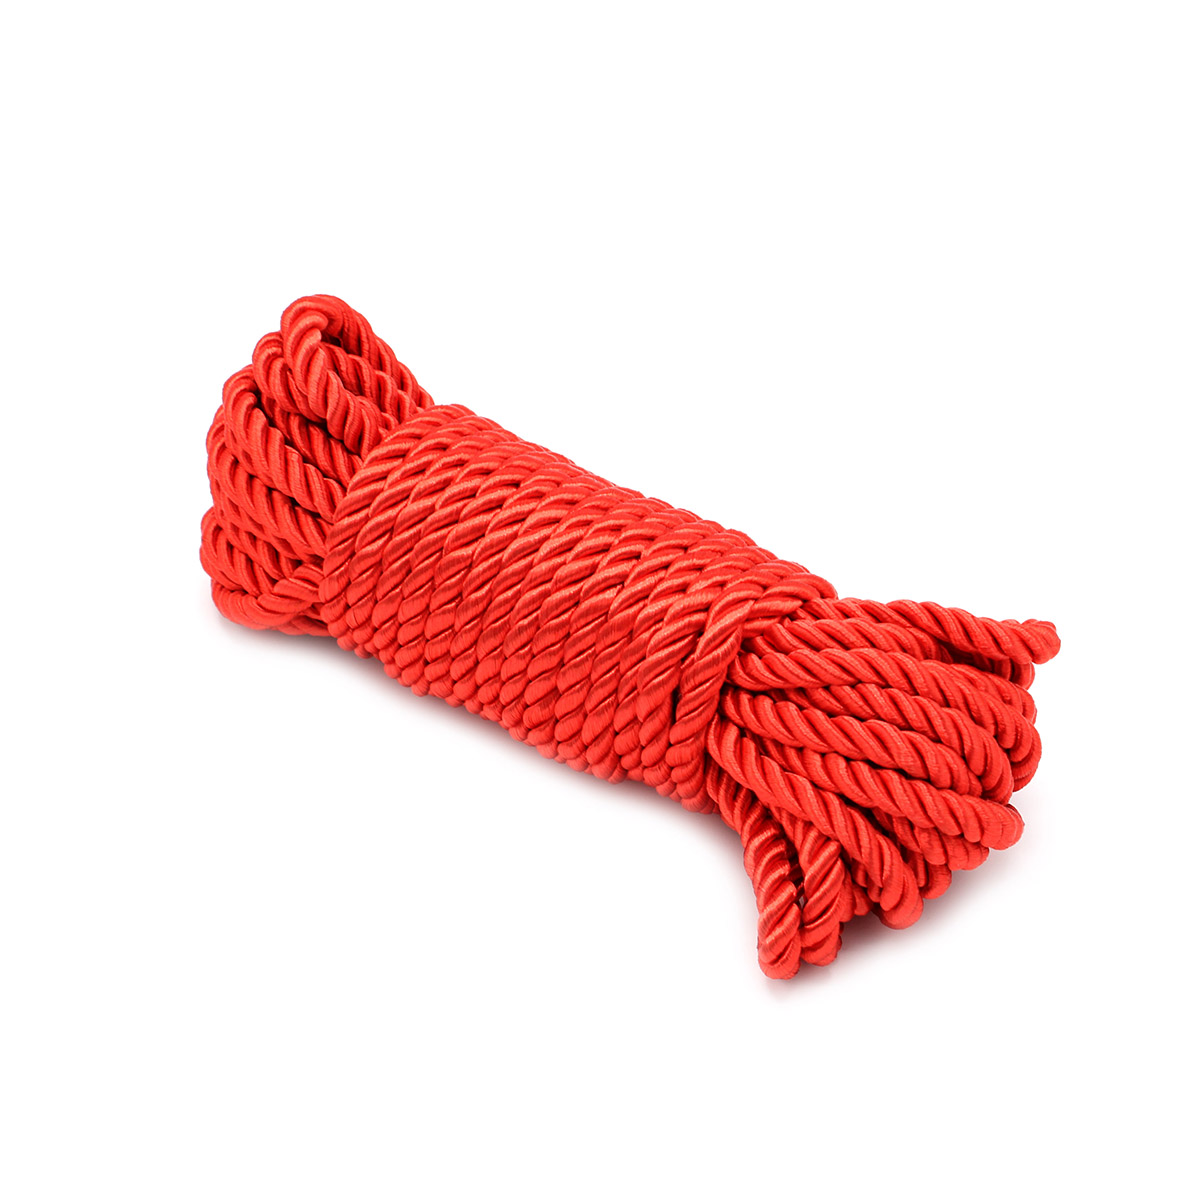 Deluxe-Bondage-Rope-10-M-Red-111-SM433-RED-2